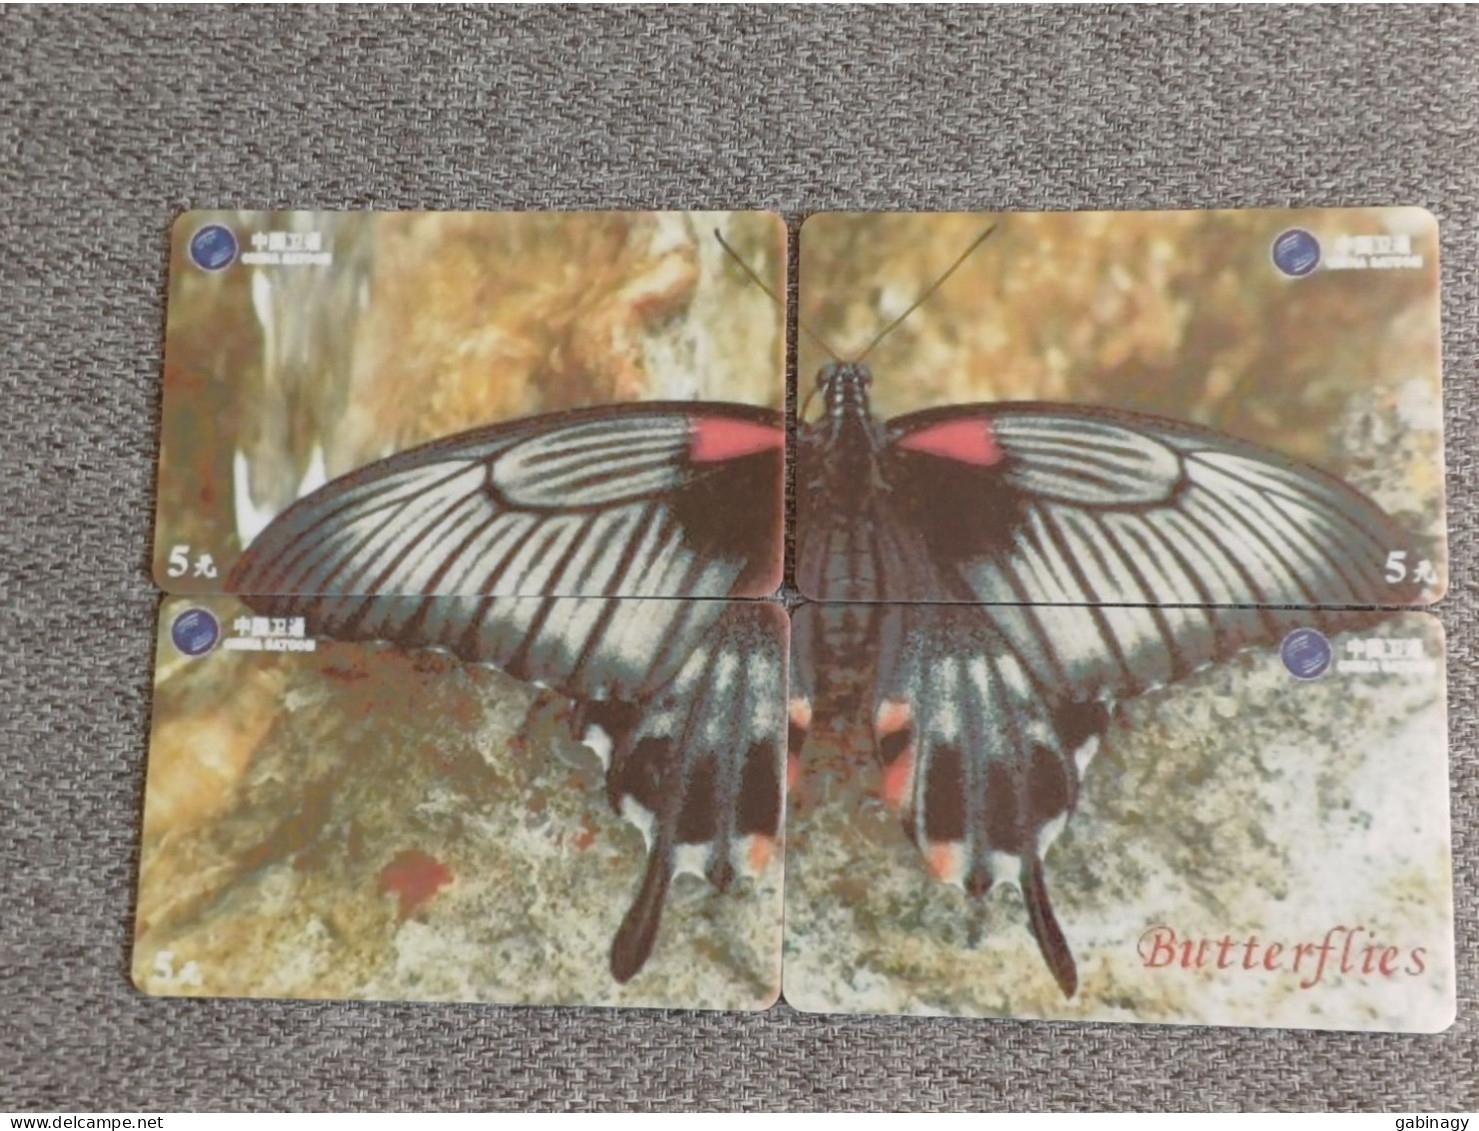 CHINA - BUTTERFLY-03 - PUZZLE SET OF 4 CARDS - Cina